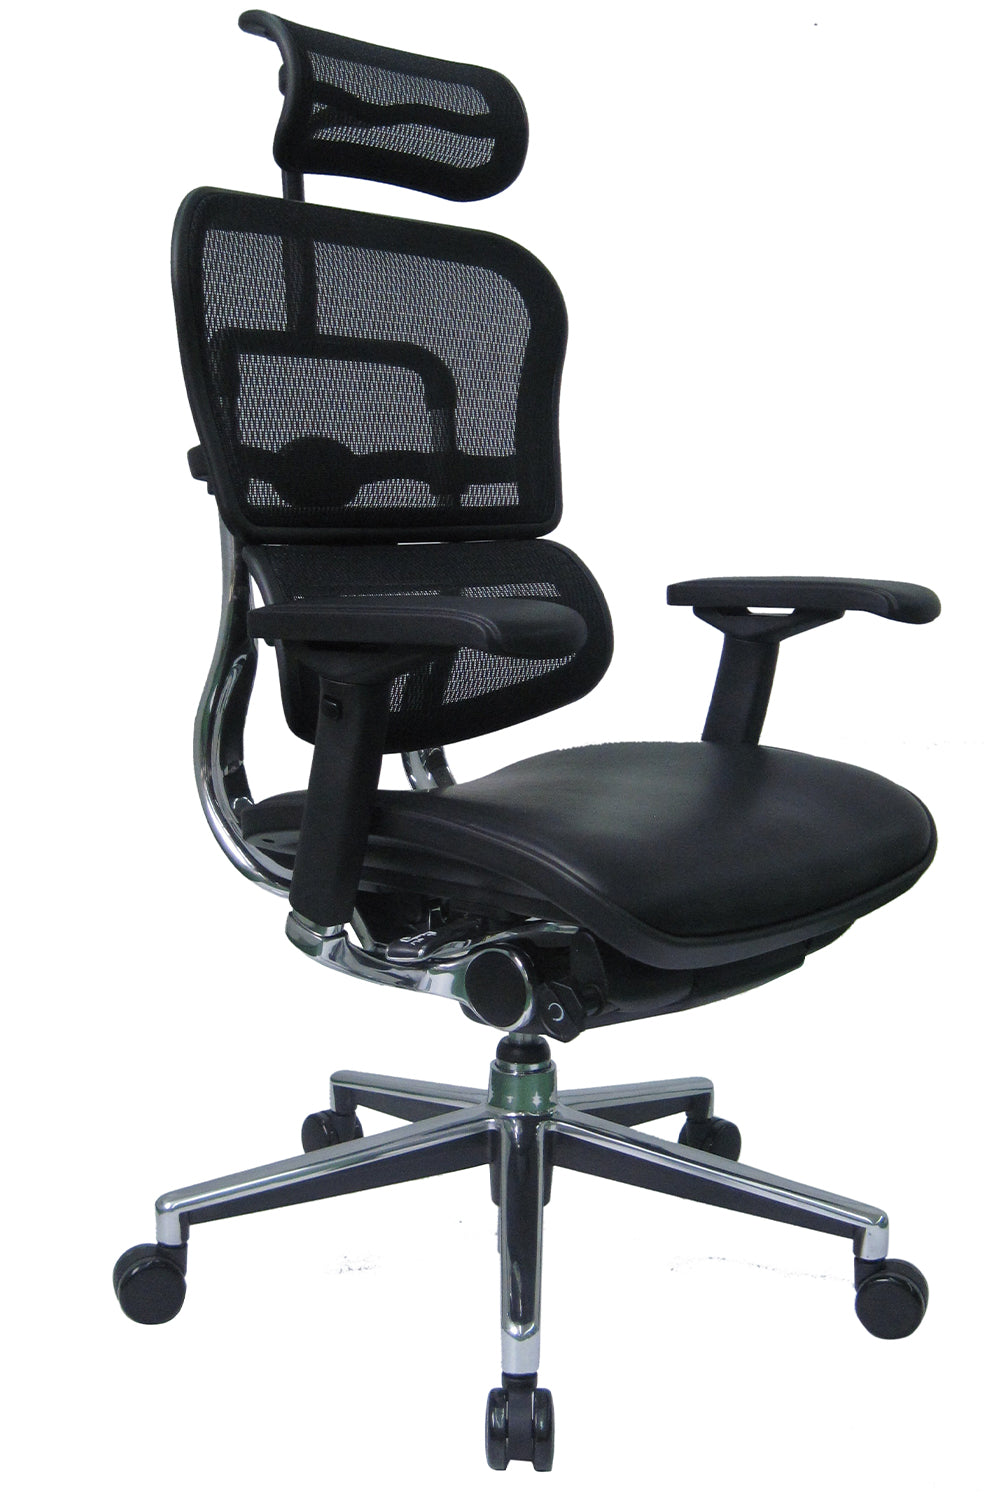 Maxwell Premium Executive Office High Back chair Leather Seat with 5D Armrest and Aluminum Base - Black